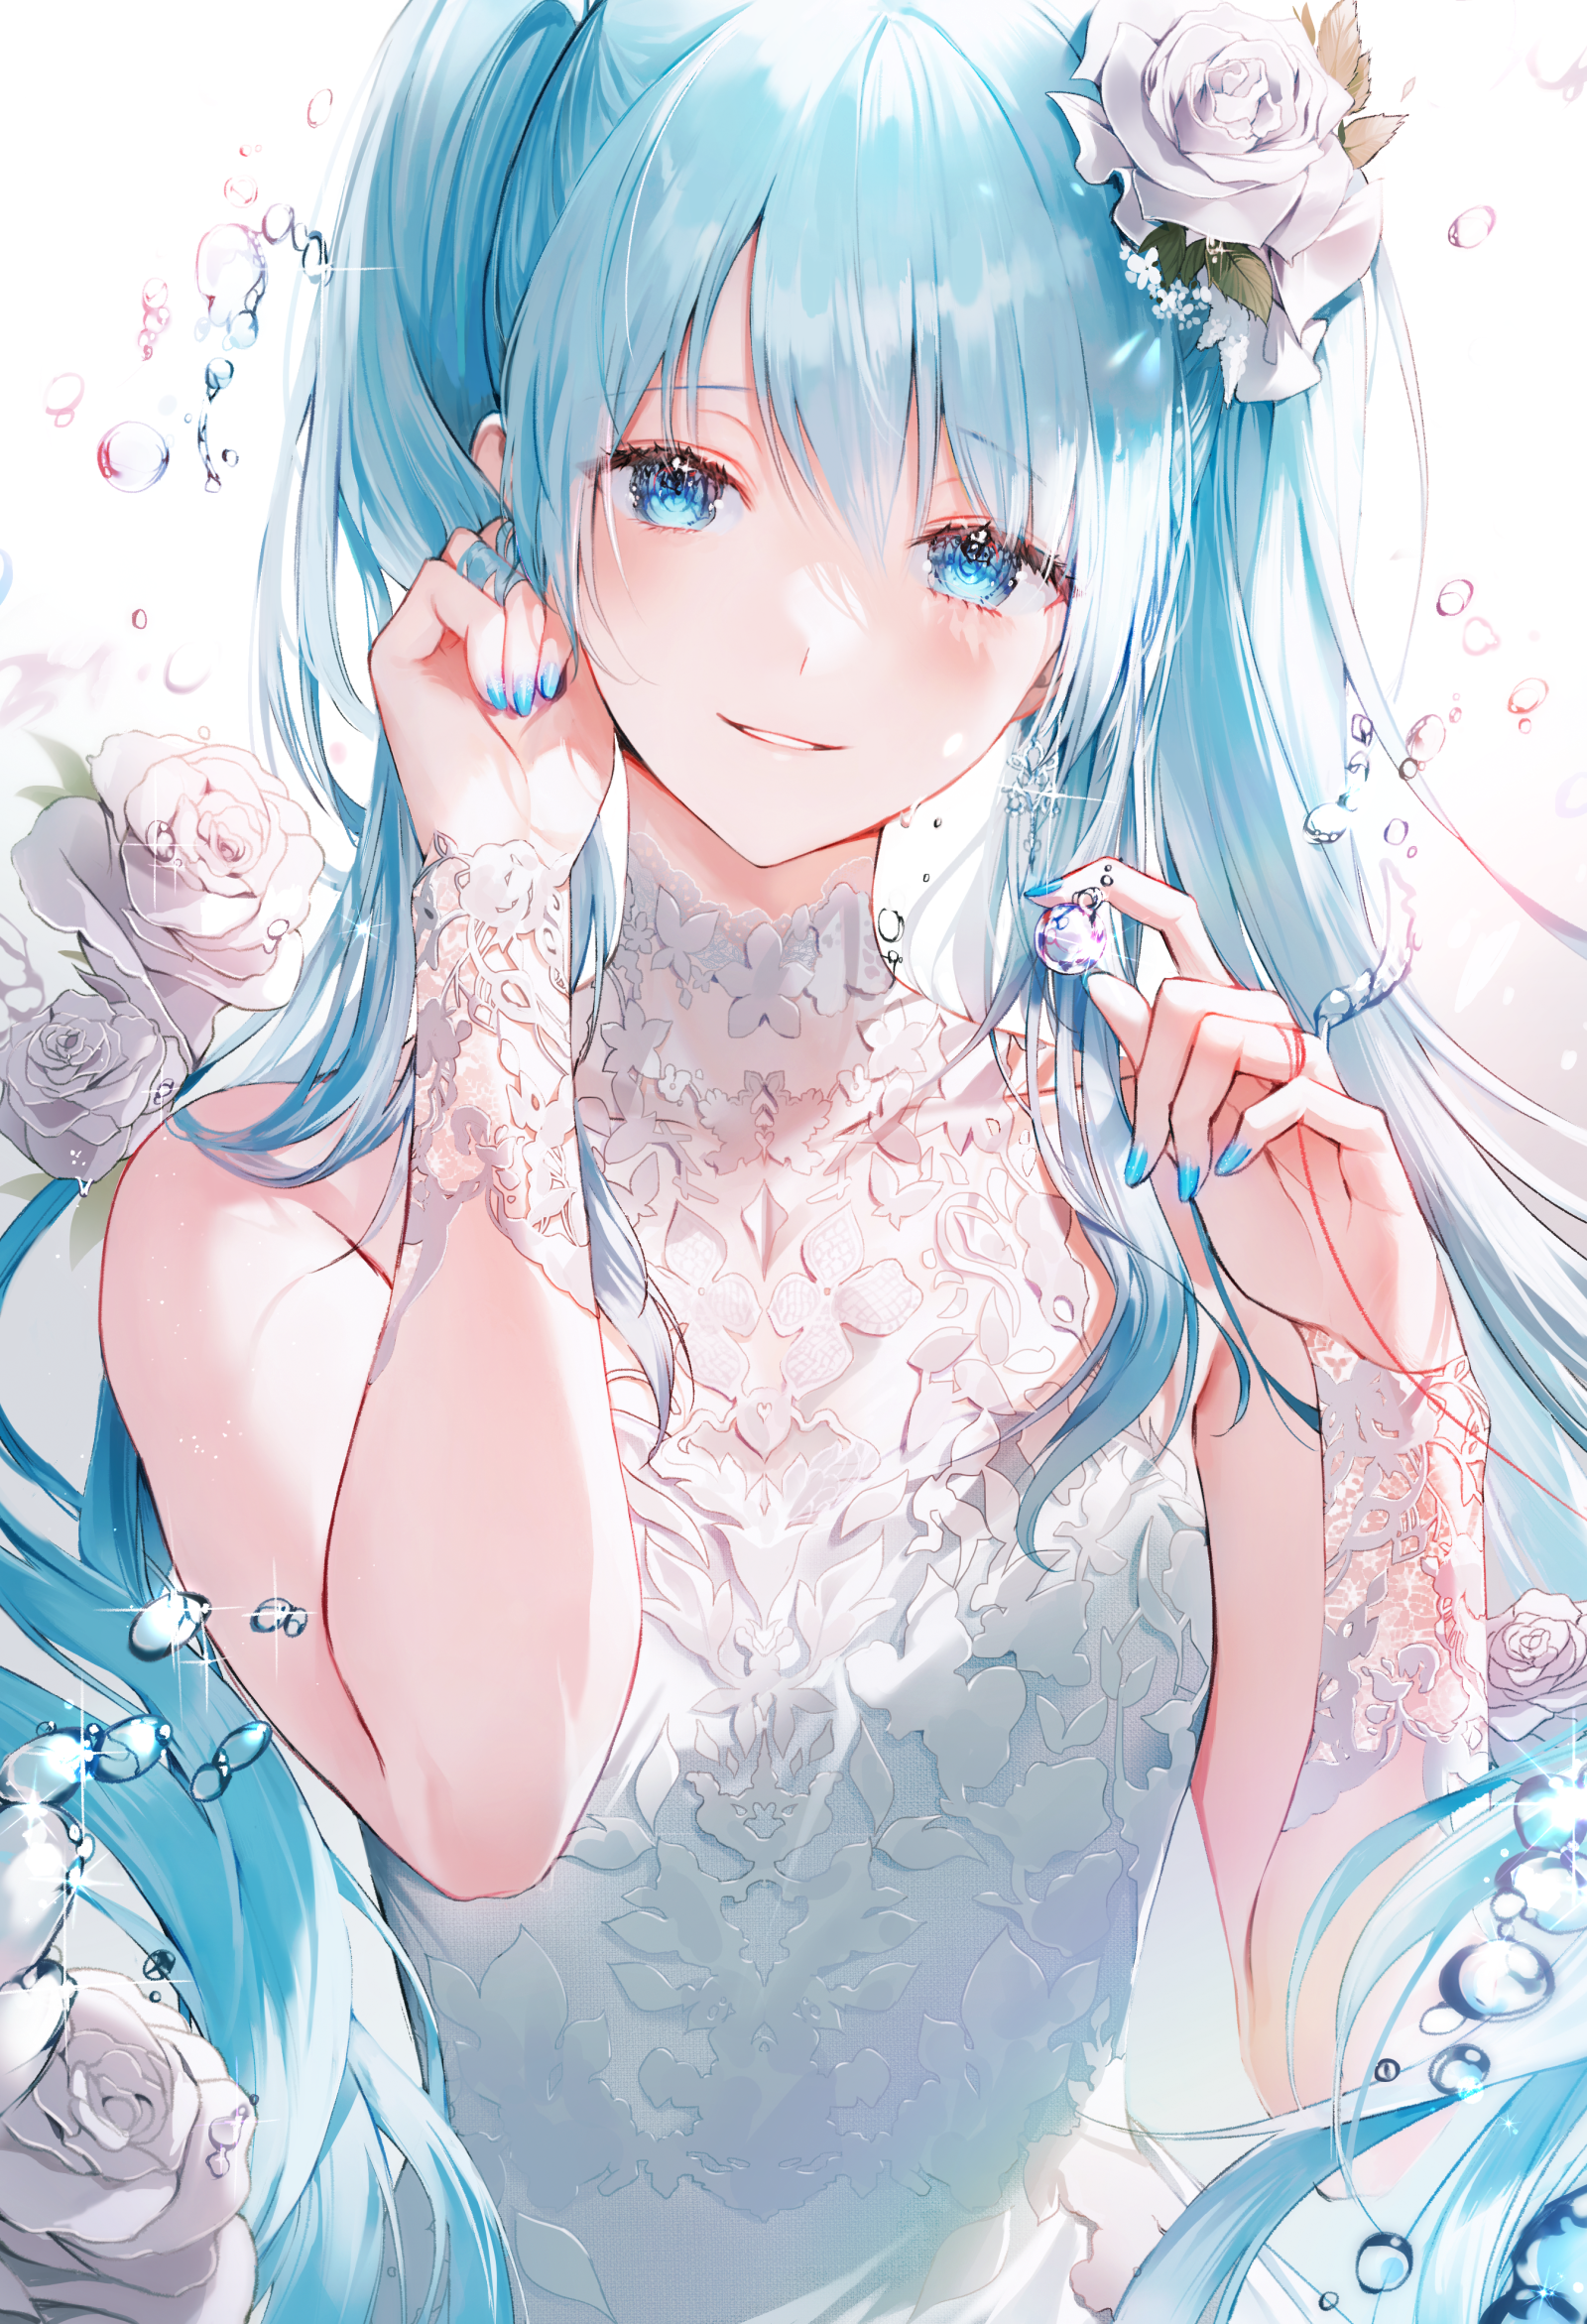 Anime 1600x2343 anime anime girls Hatsune Miku Vocaloid blue hair blue eyes twintails long hair looking at viewer dress water drops water flower in hair blushing portrait display smiling